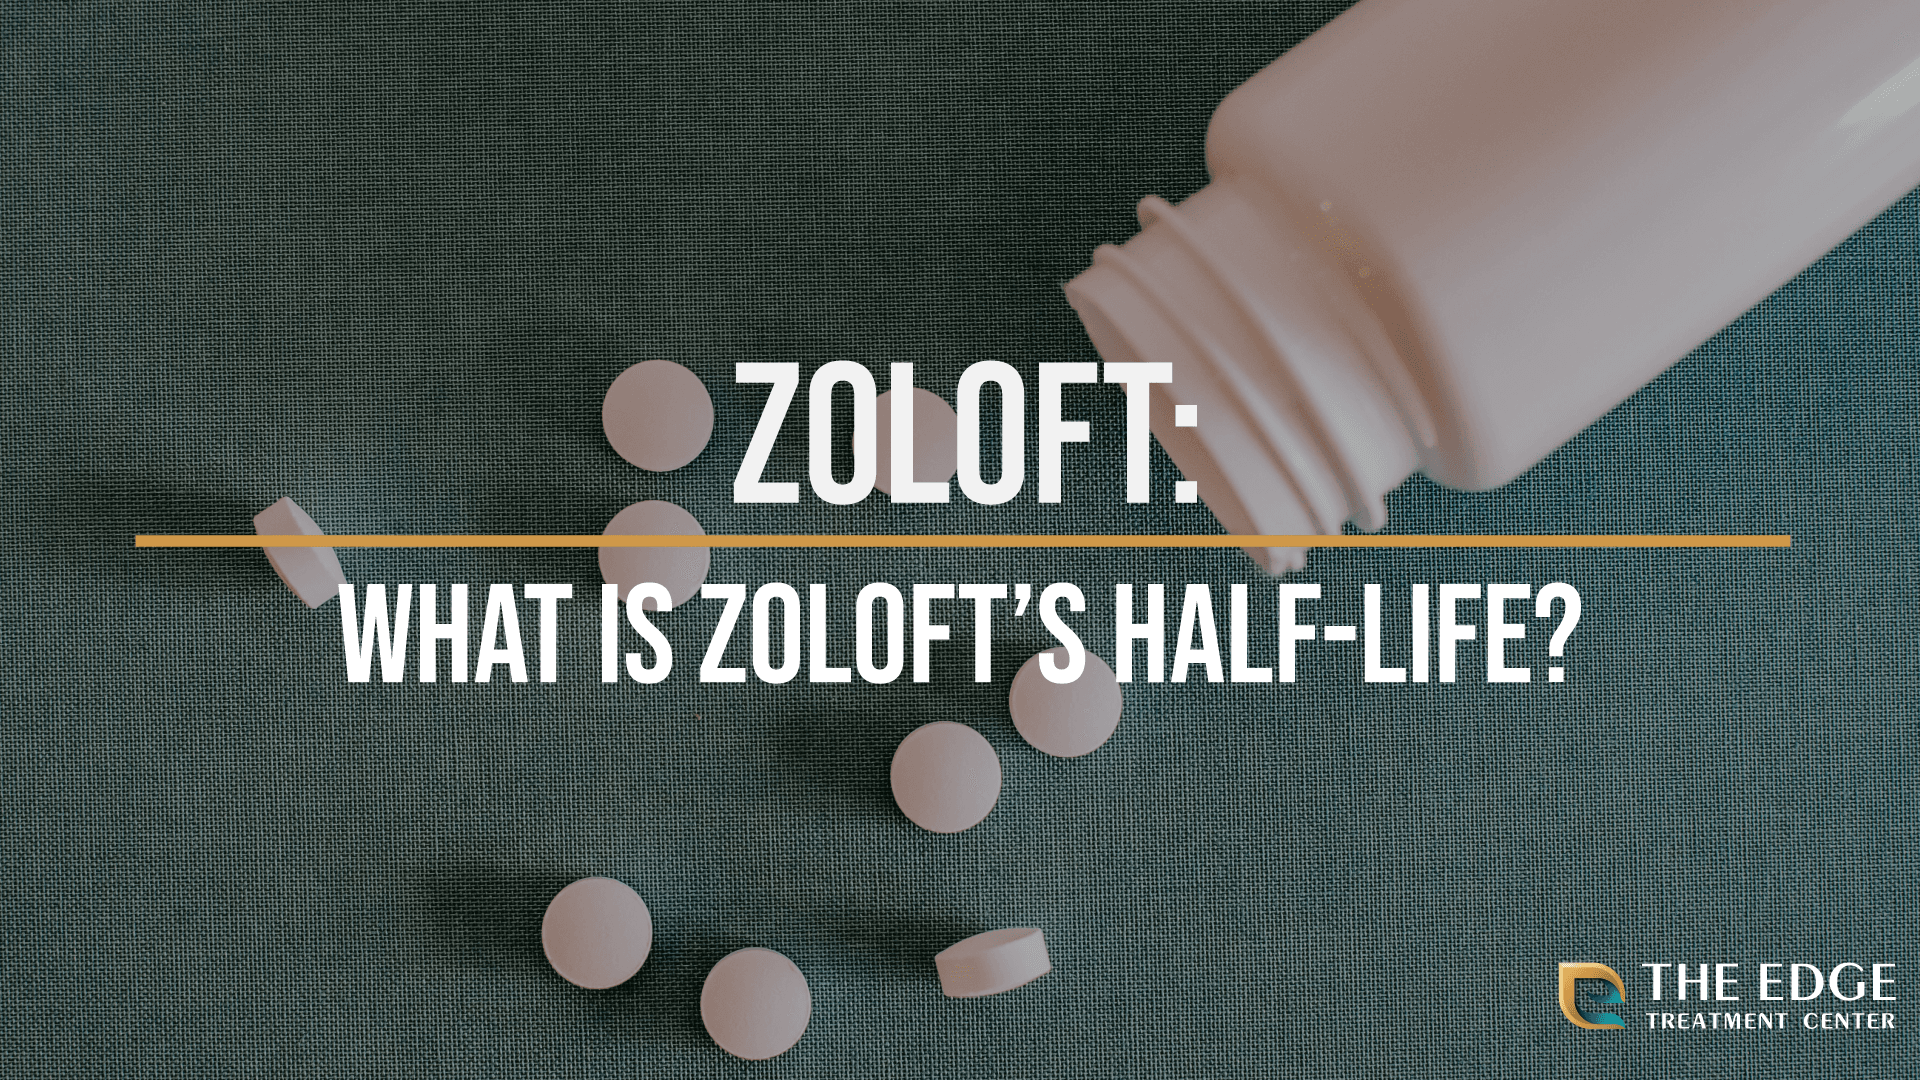 What is the Half-Life of Zoloft?